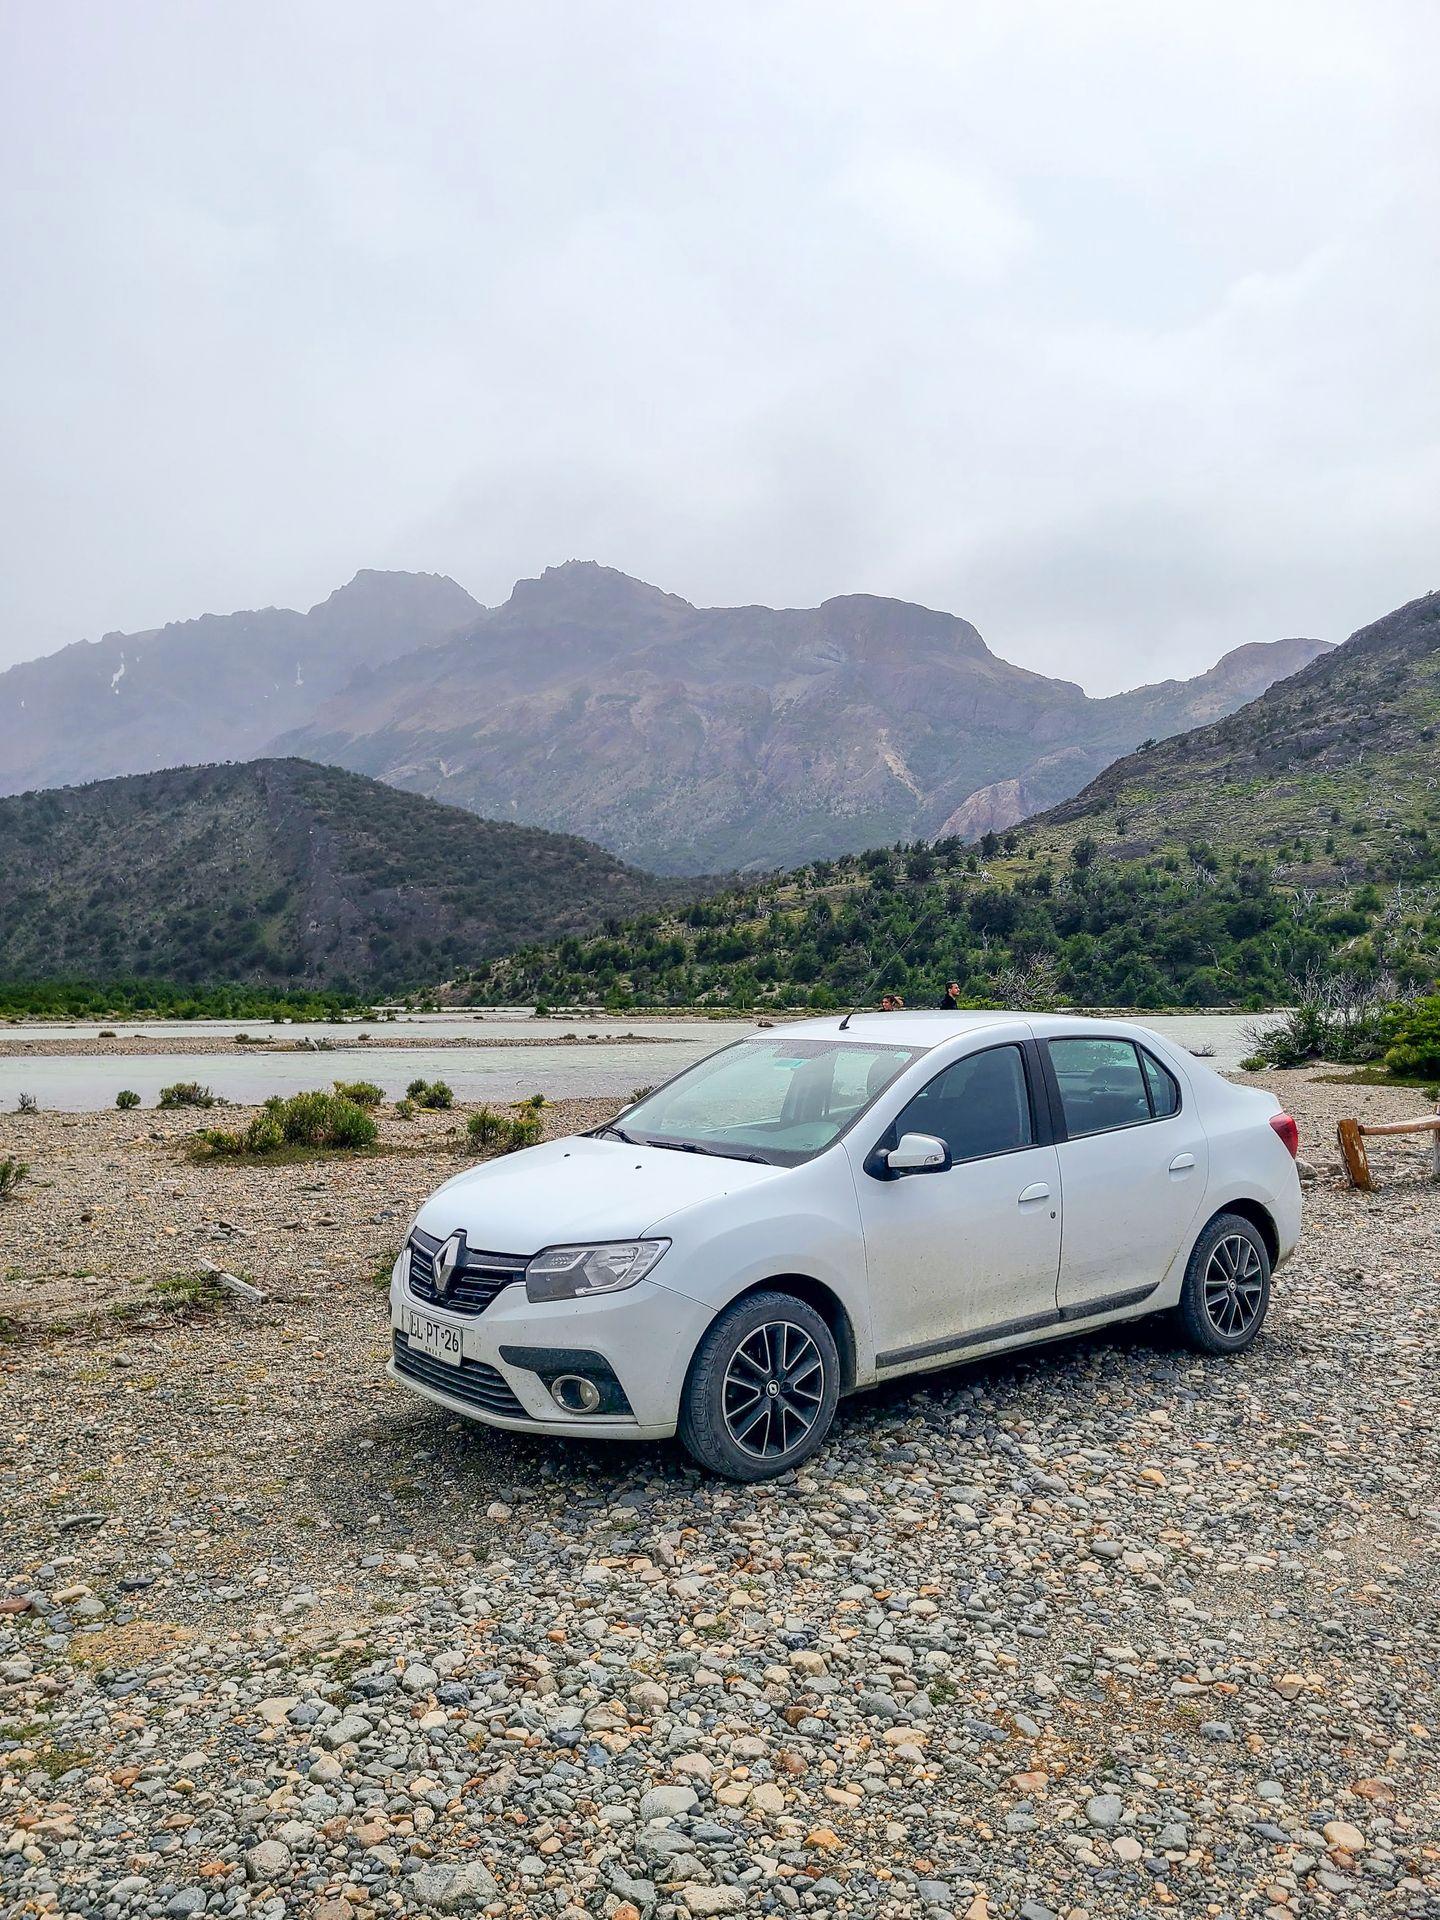 A small white car next to a lake with mountains in the background.